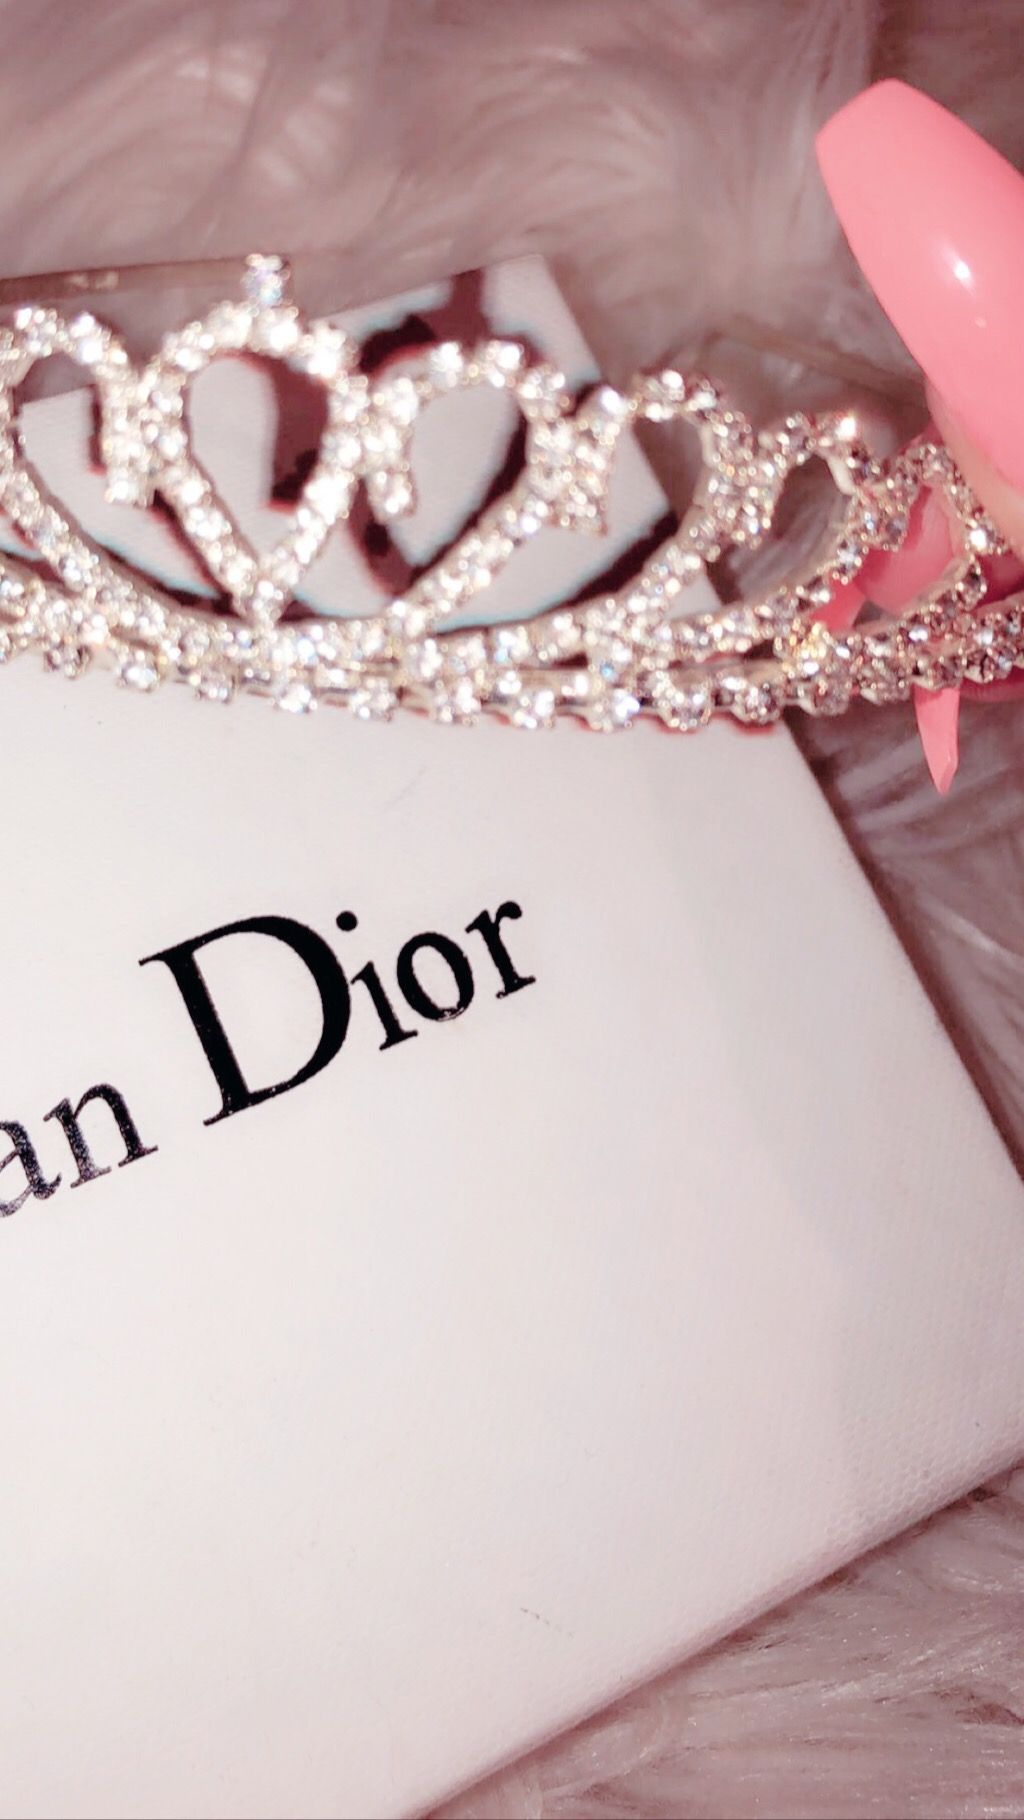 A crown sitting on top of some makeup - Dior, bling